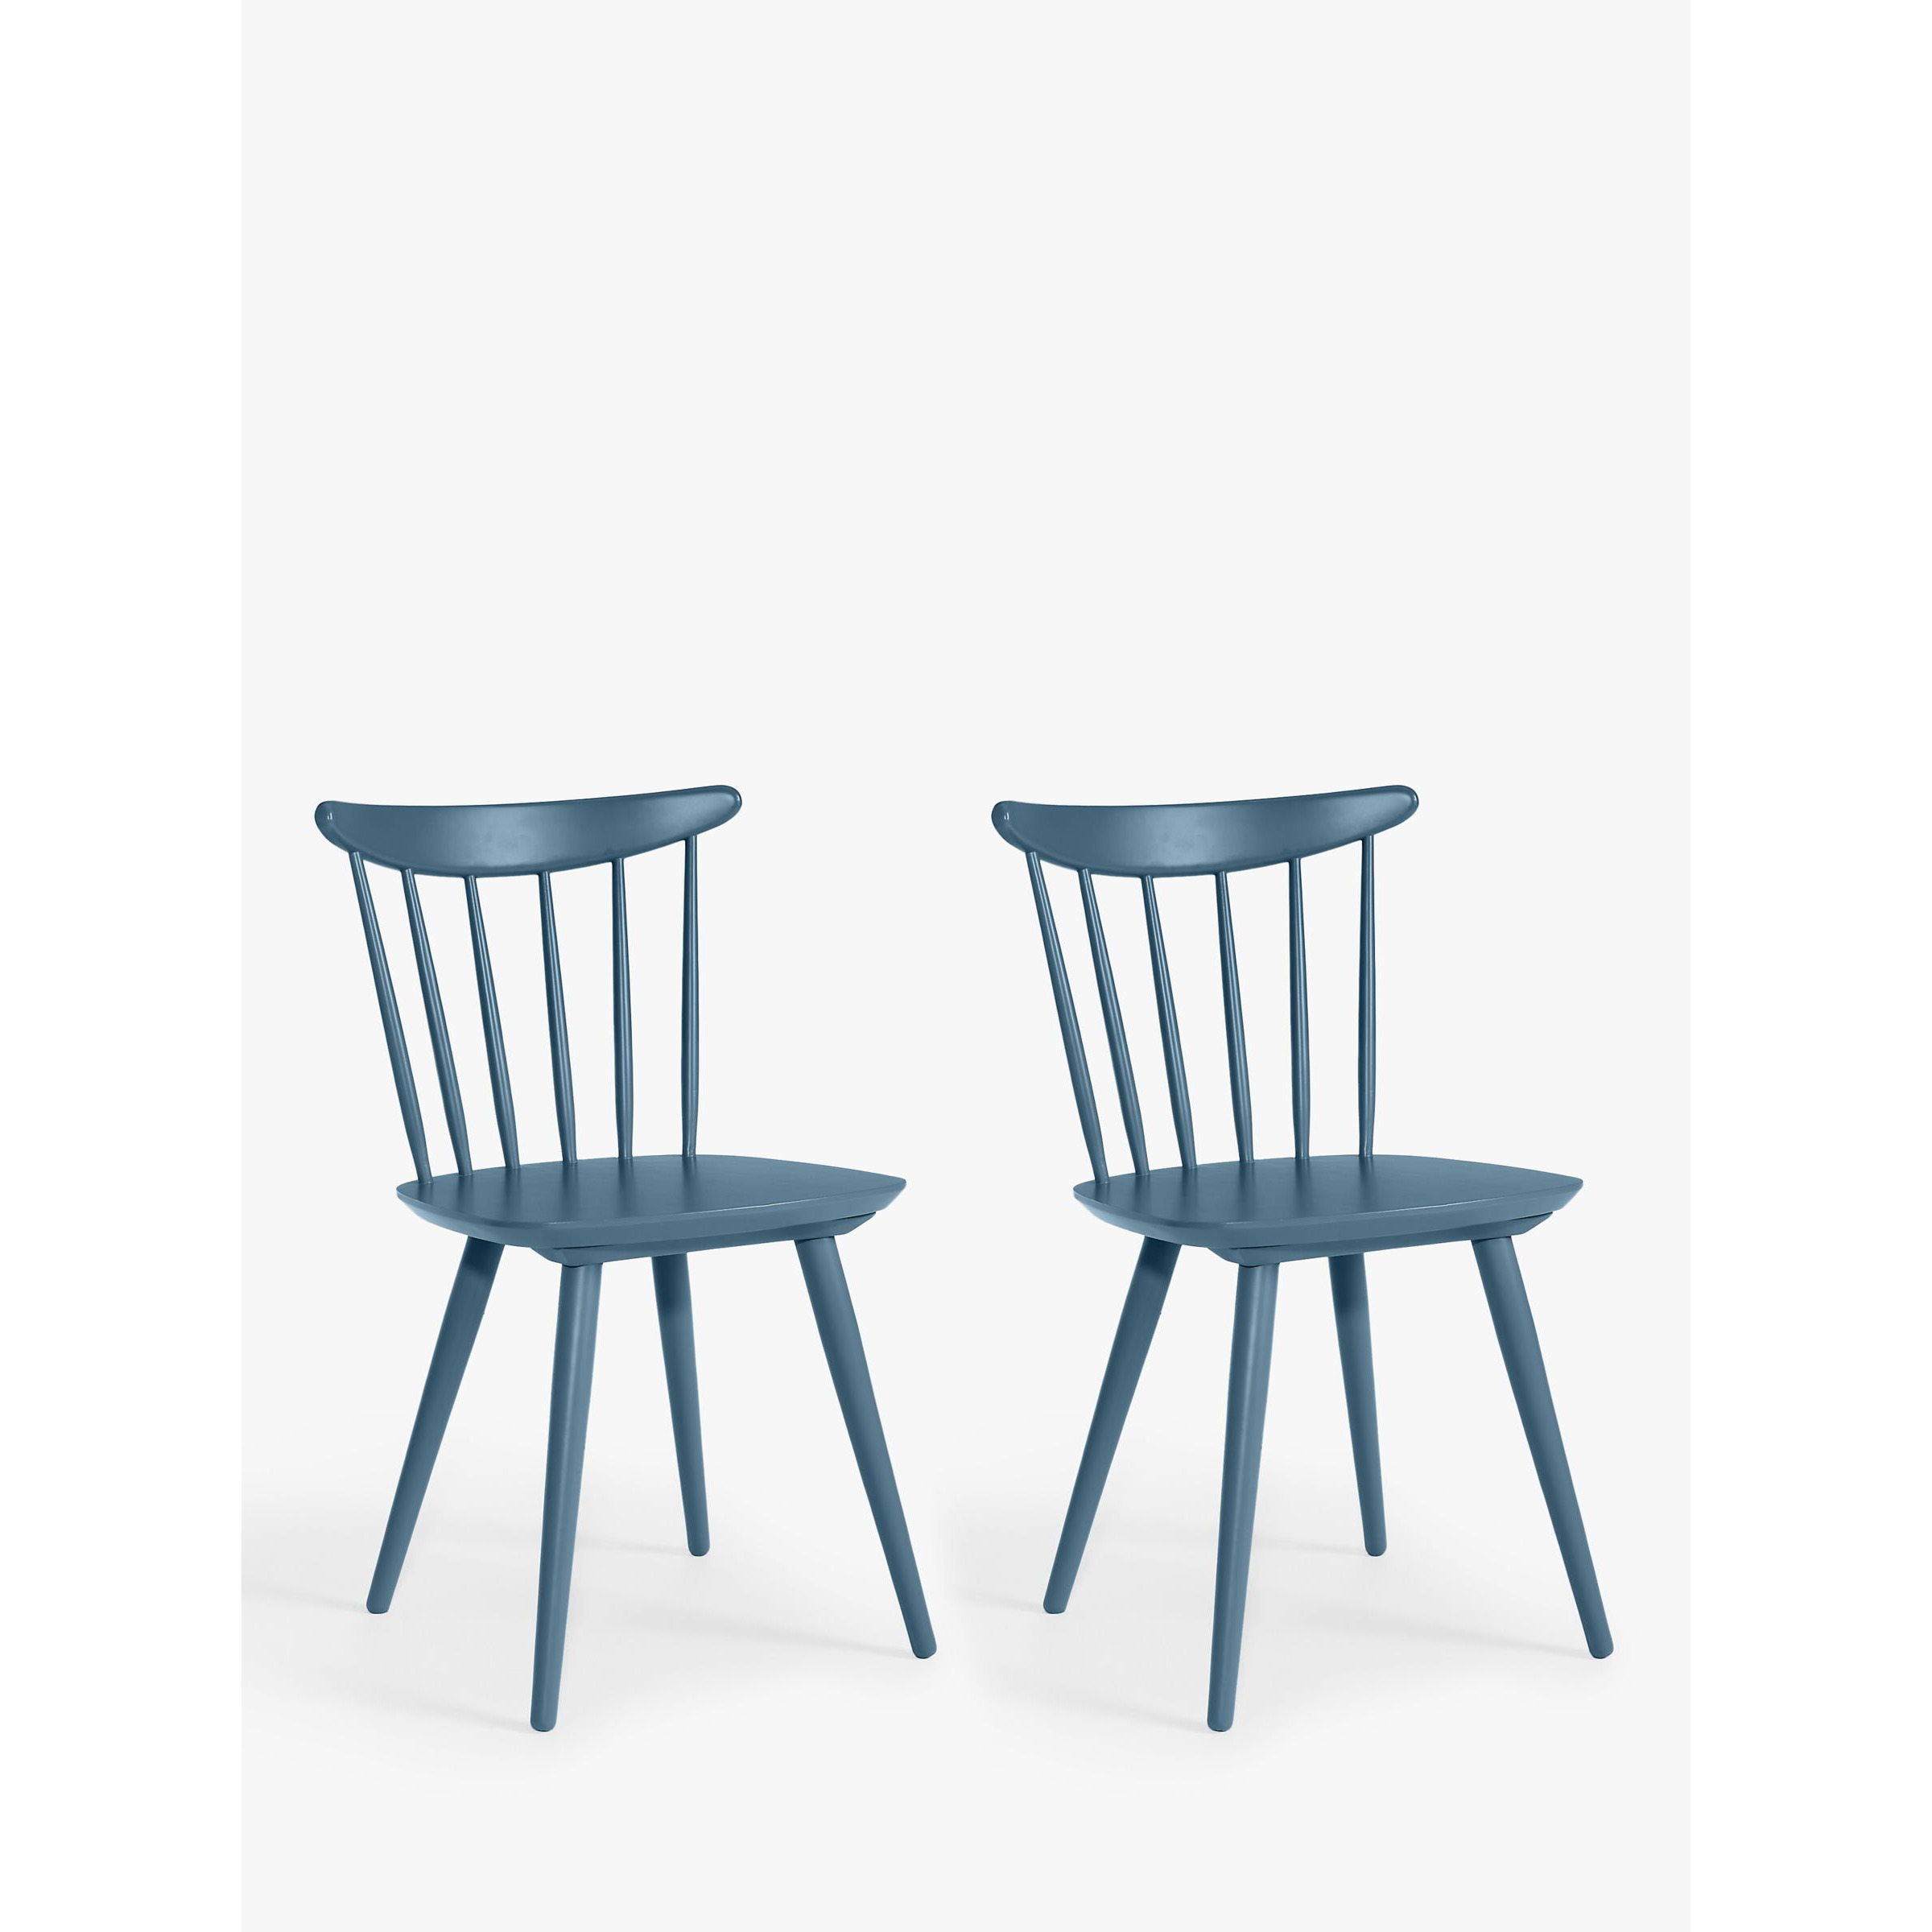 John Lewis Spindle Dining Chair, Set of 2, FSC-Certified (Beech Wood) - image 1